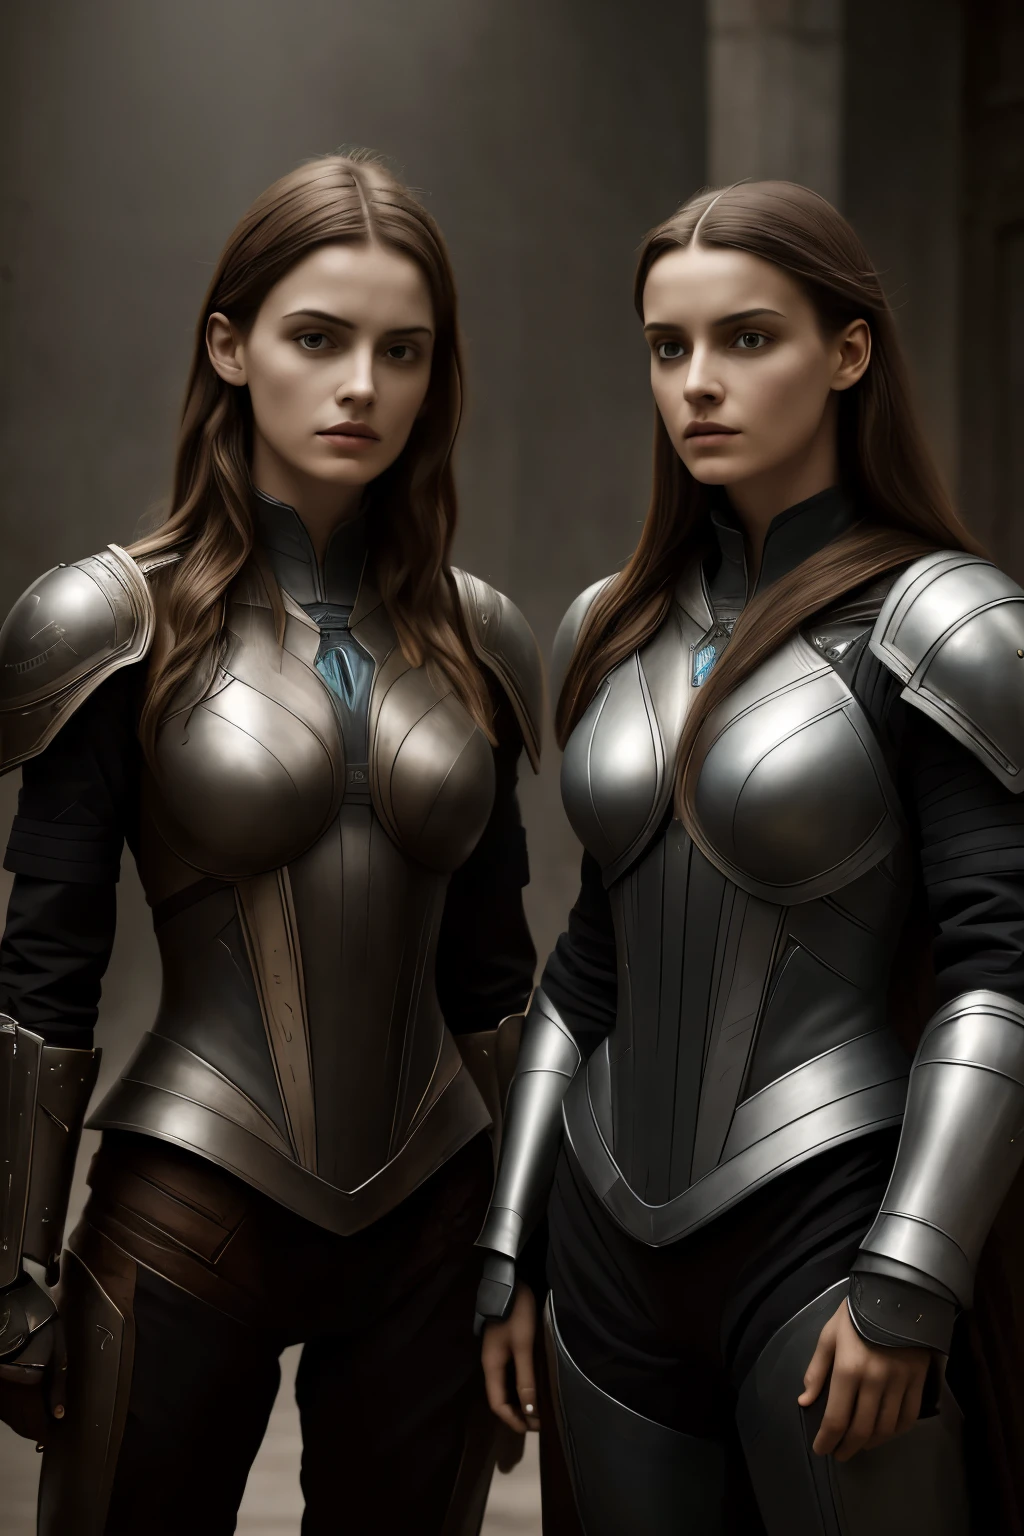 there are two women in armor standing next to each other, highly detailed surreal vfx, inspired by Peter Lindbergh, desaturated and muted colors, inspired by Nikola Avramov, clockpunk, detailed and beautiful faces, by Steven James Petruccio, prometheus (2012)